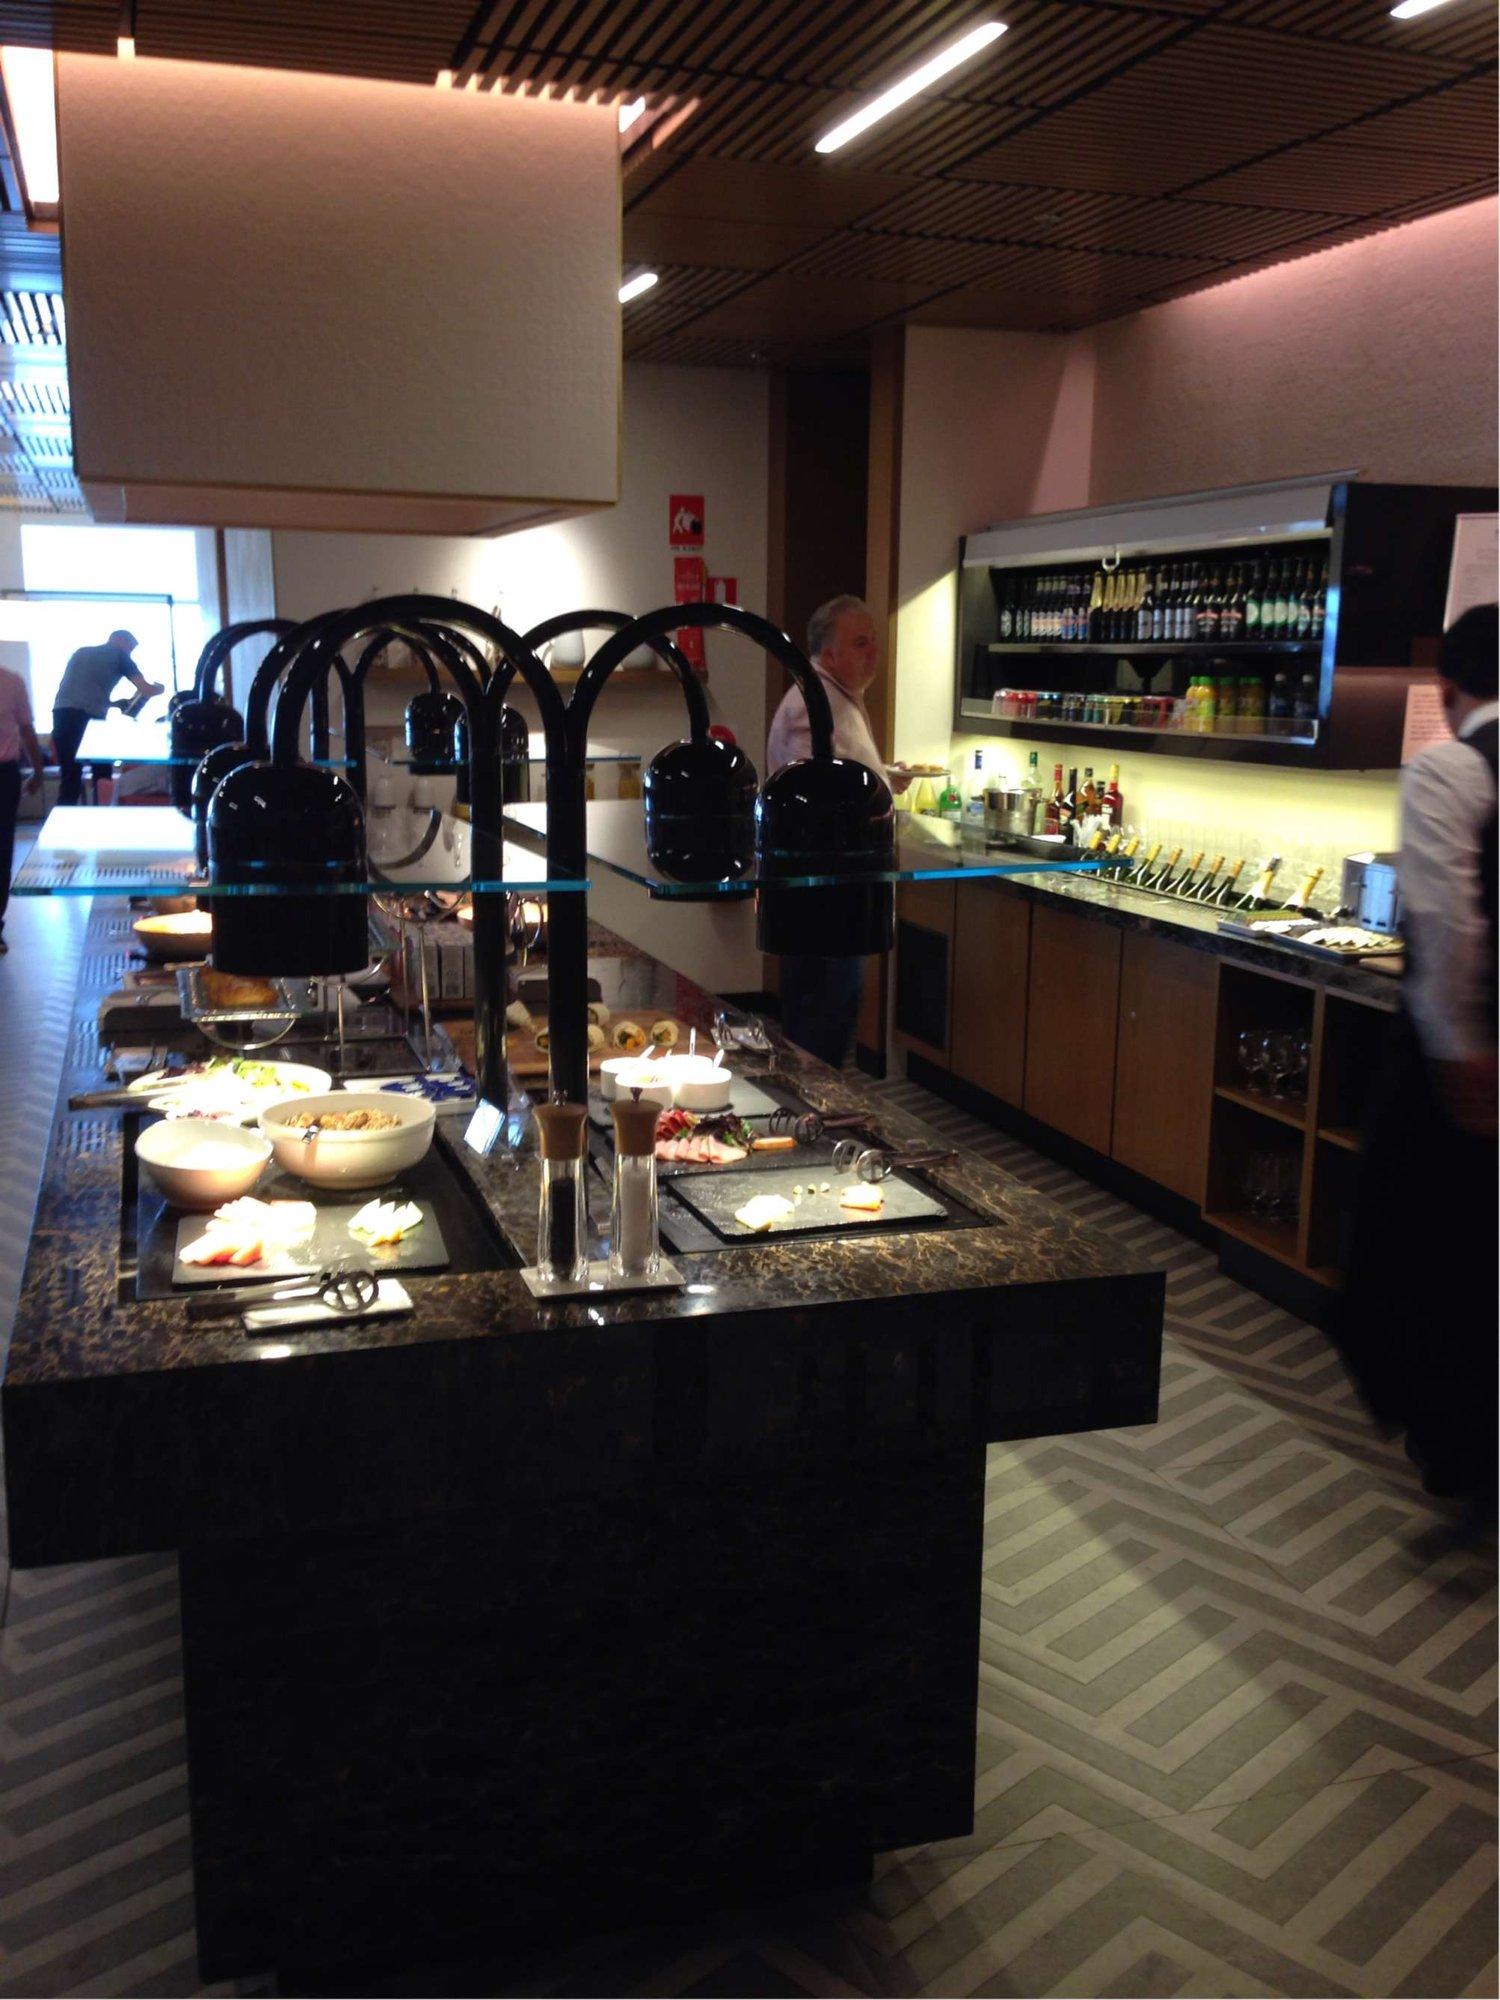 Singapore Airlines SilverKris Business Class Lounge image 4 of 20